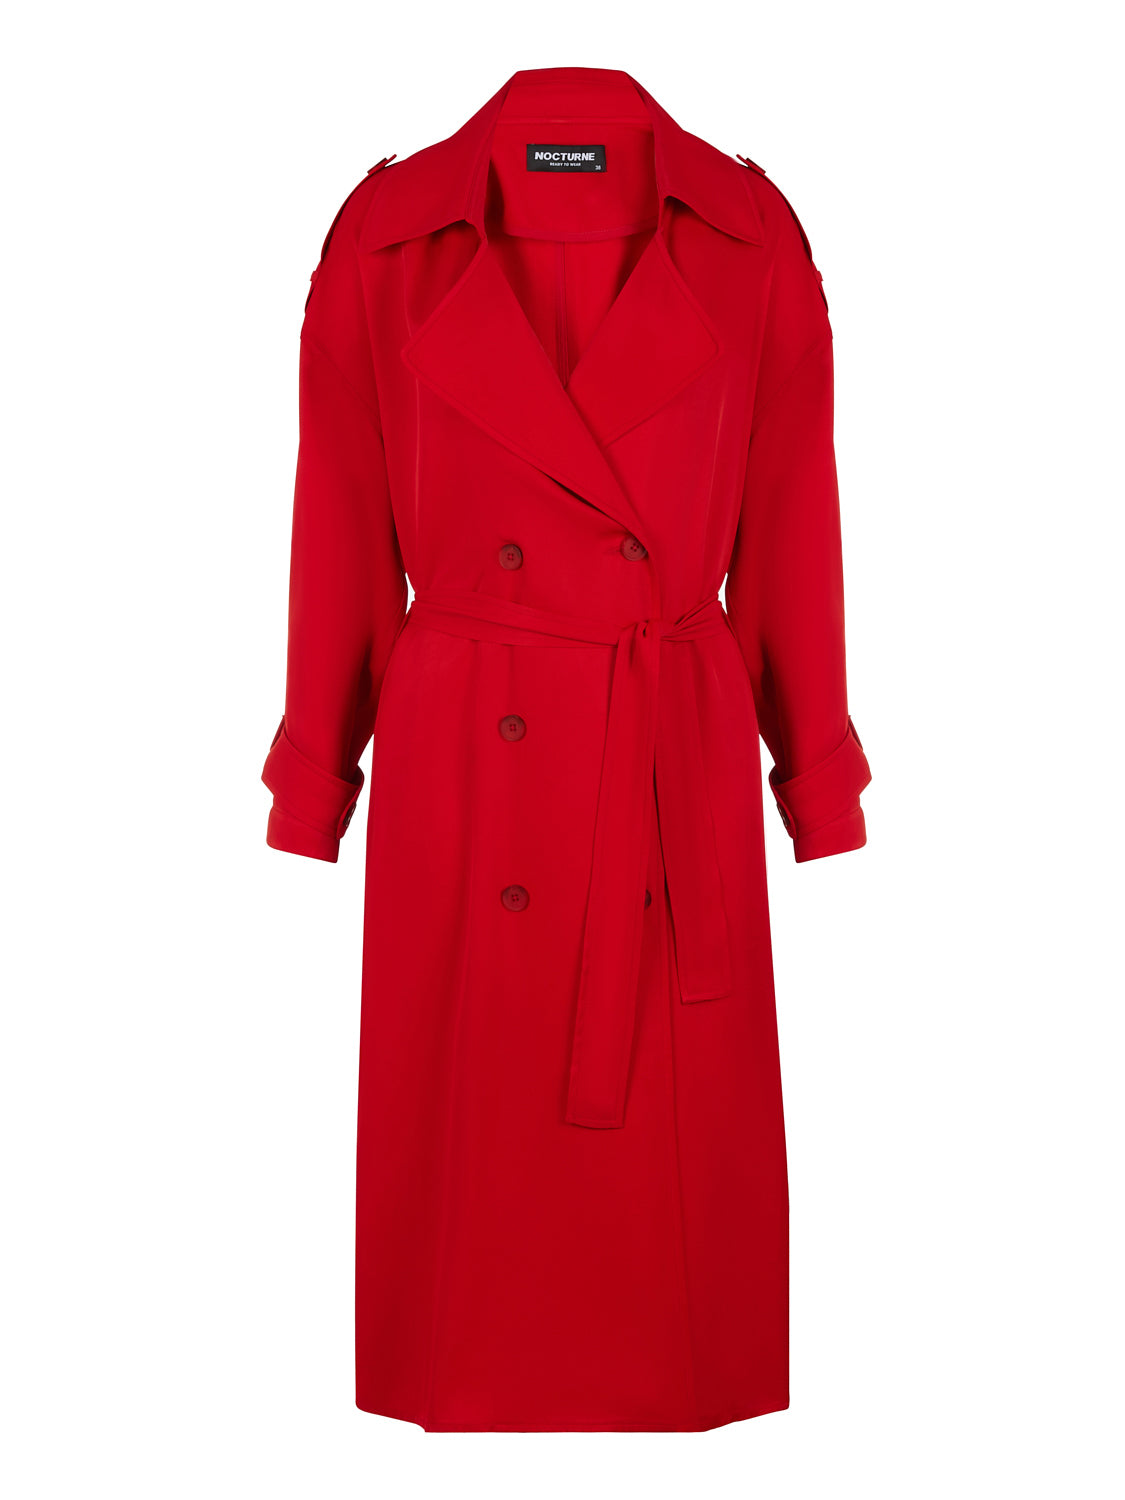 Nocturne Women's Red Double-breasted Belted Trench Coat